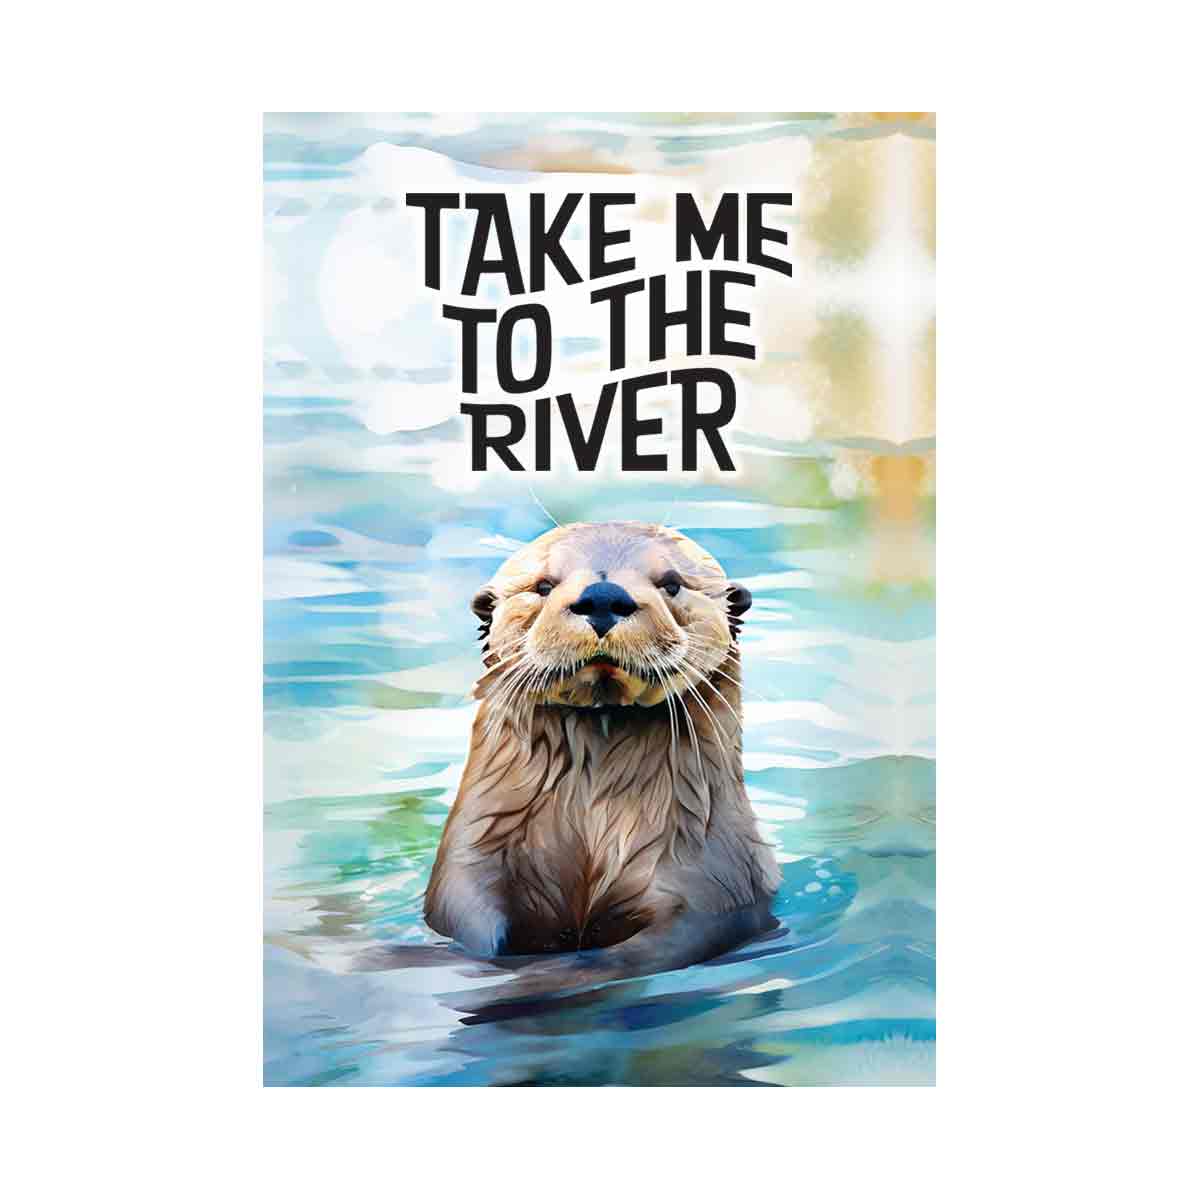 Take me to the river   otter